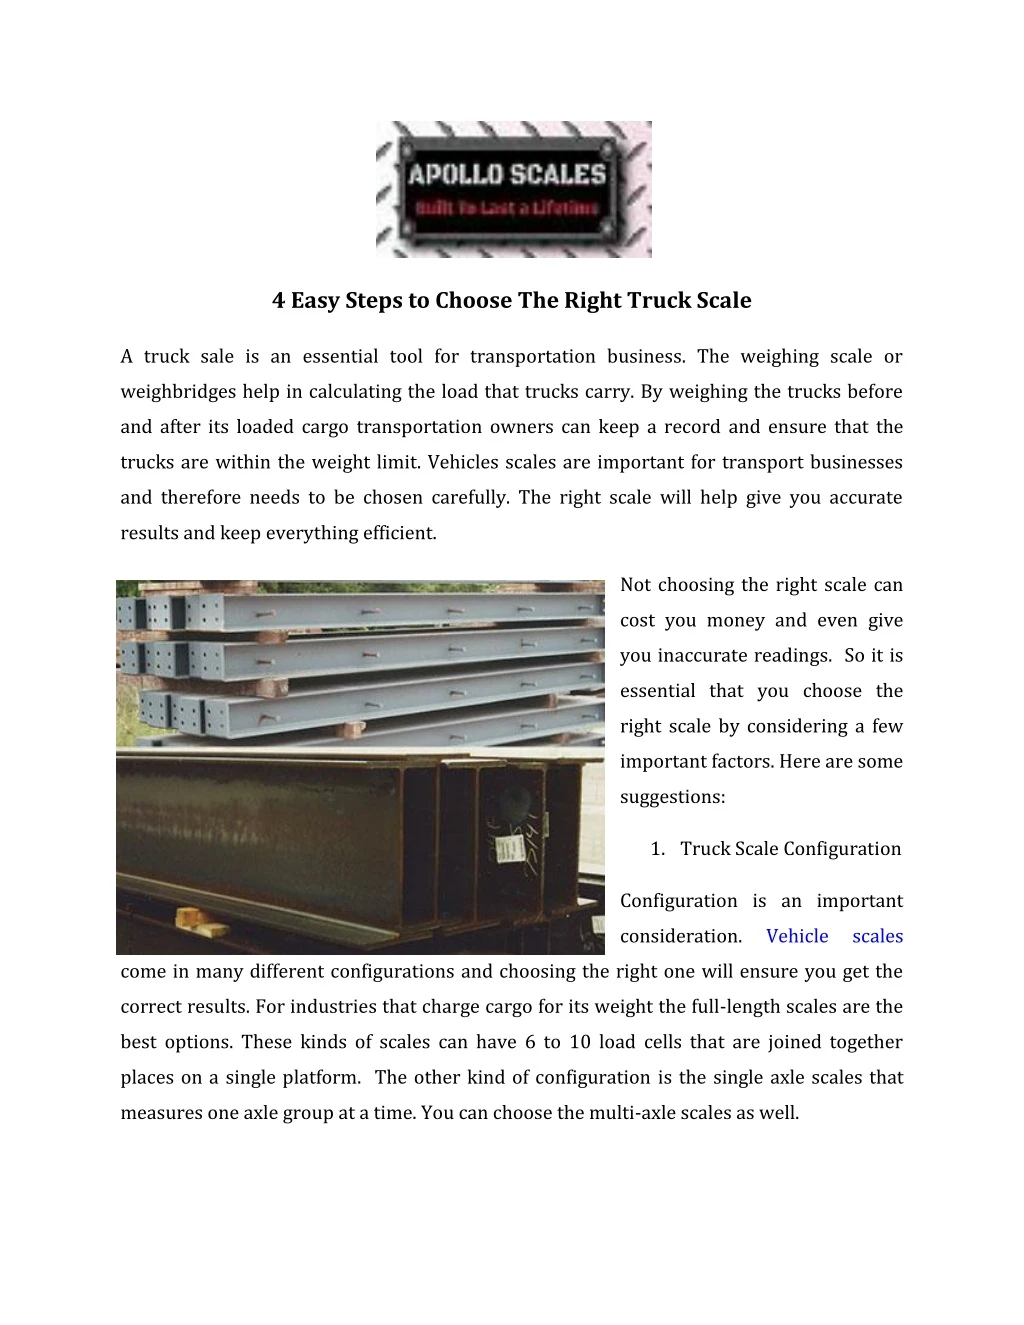 4 easy steps to choose the right truck scale